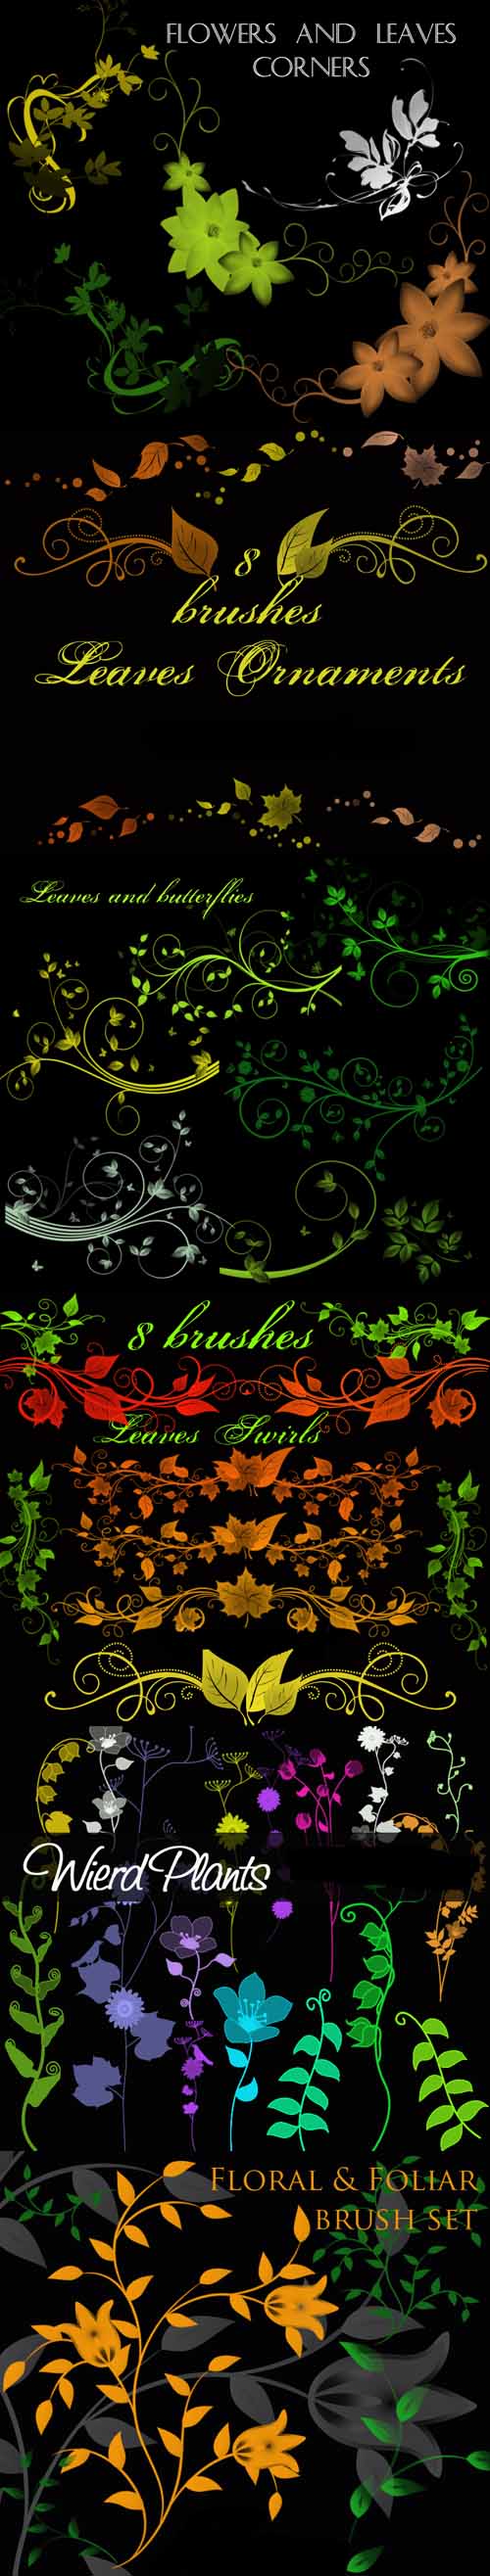 Flowers and Leaves Brushes Set